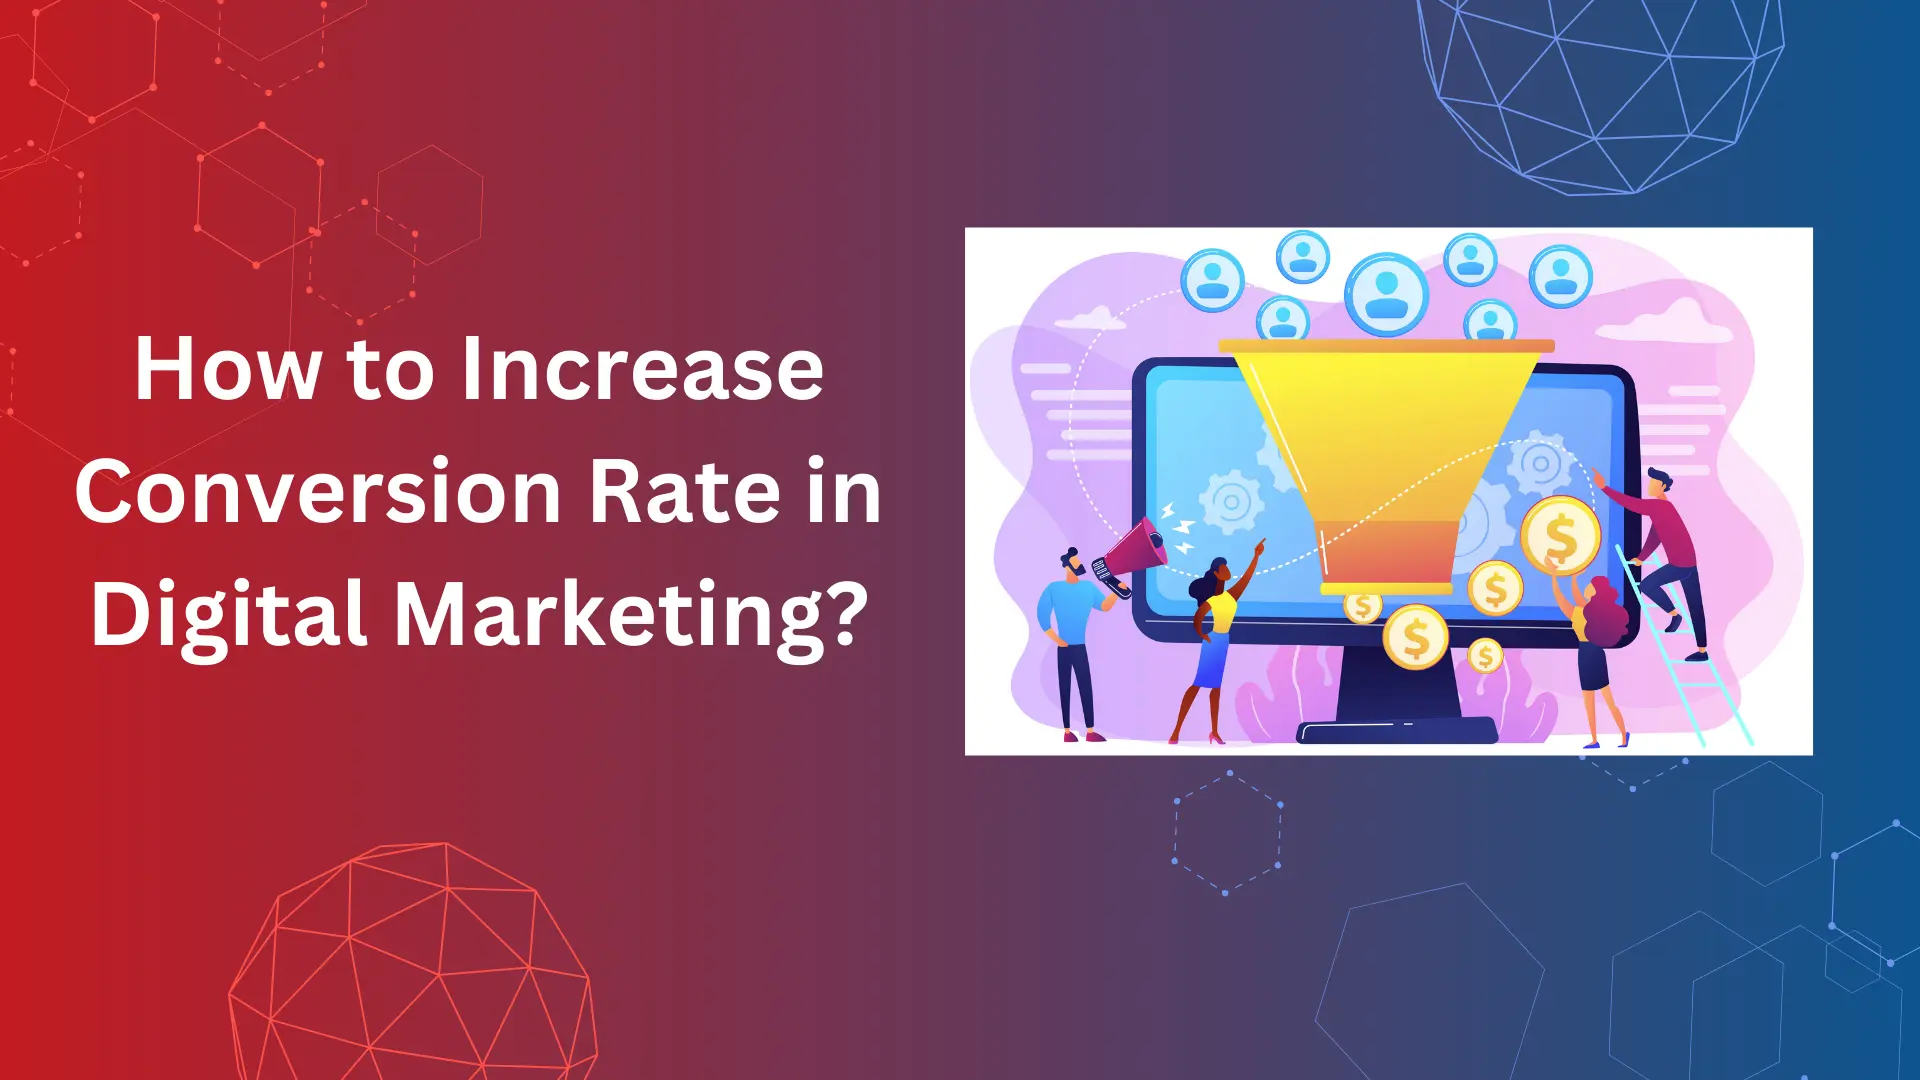 How to Increase Conversion Rate in Digital Marketing